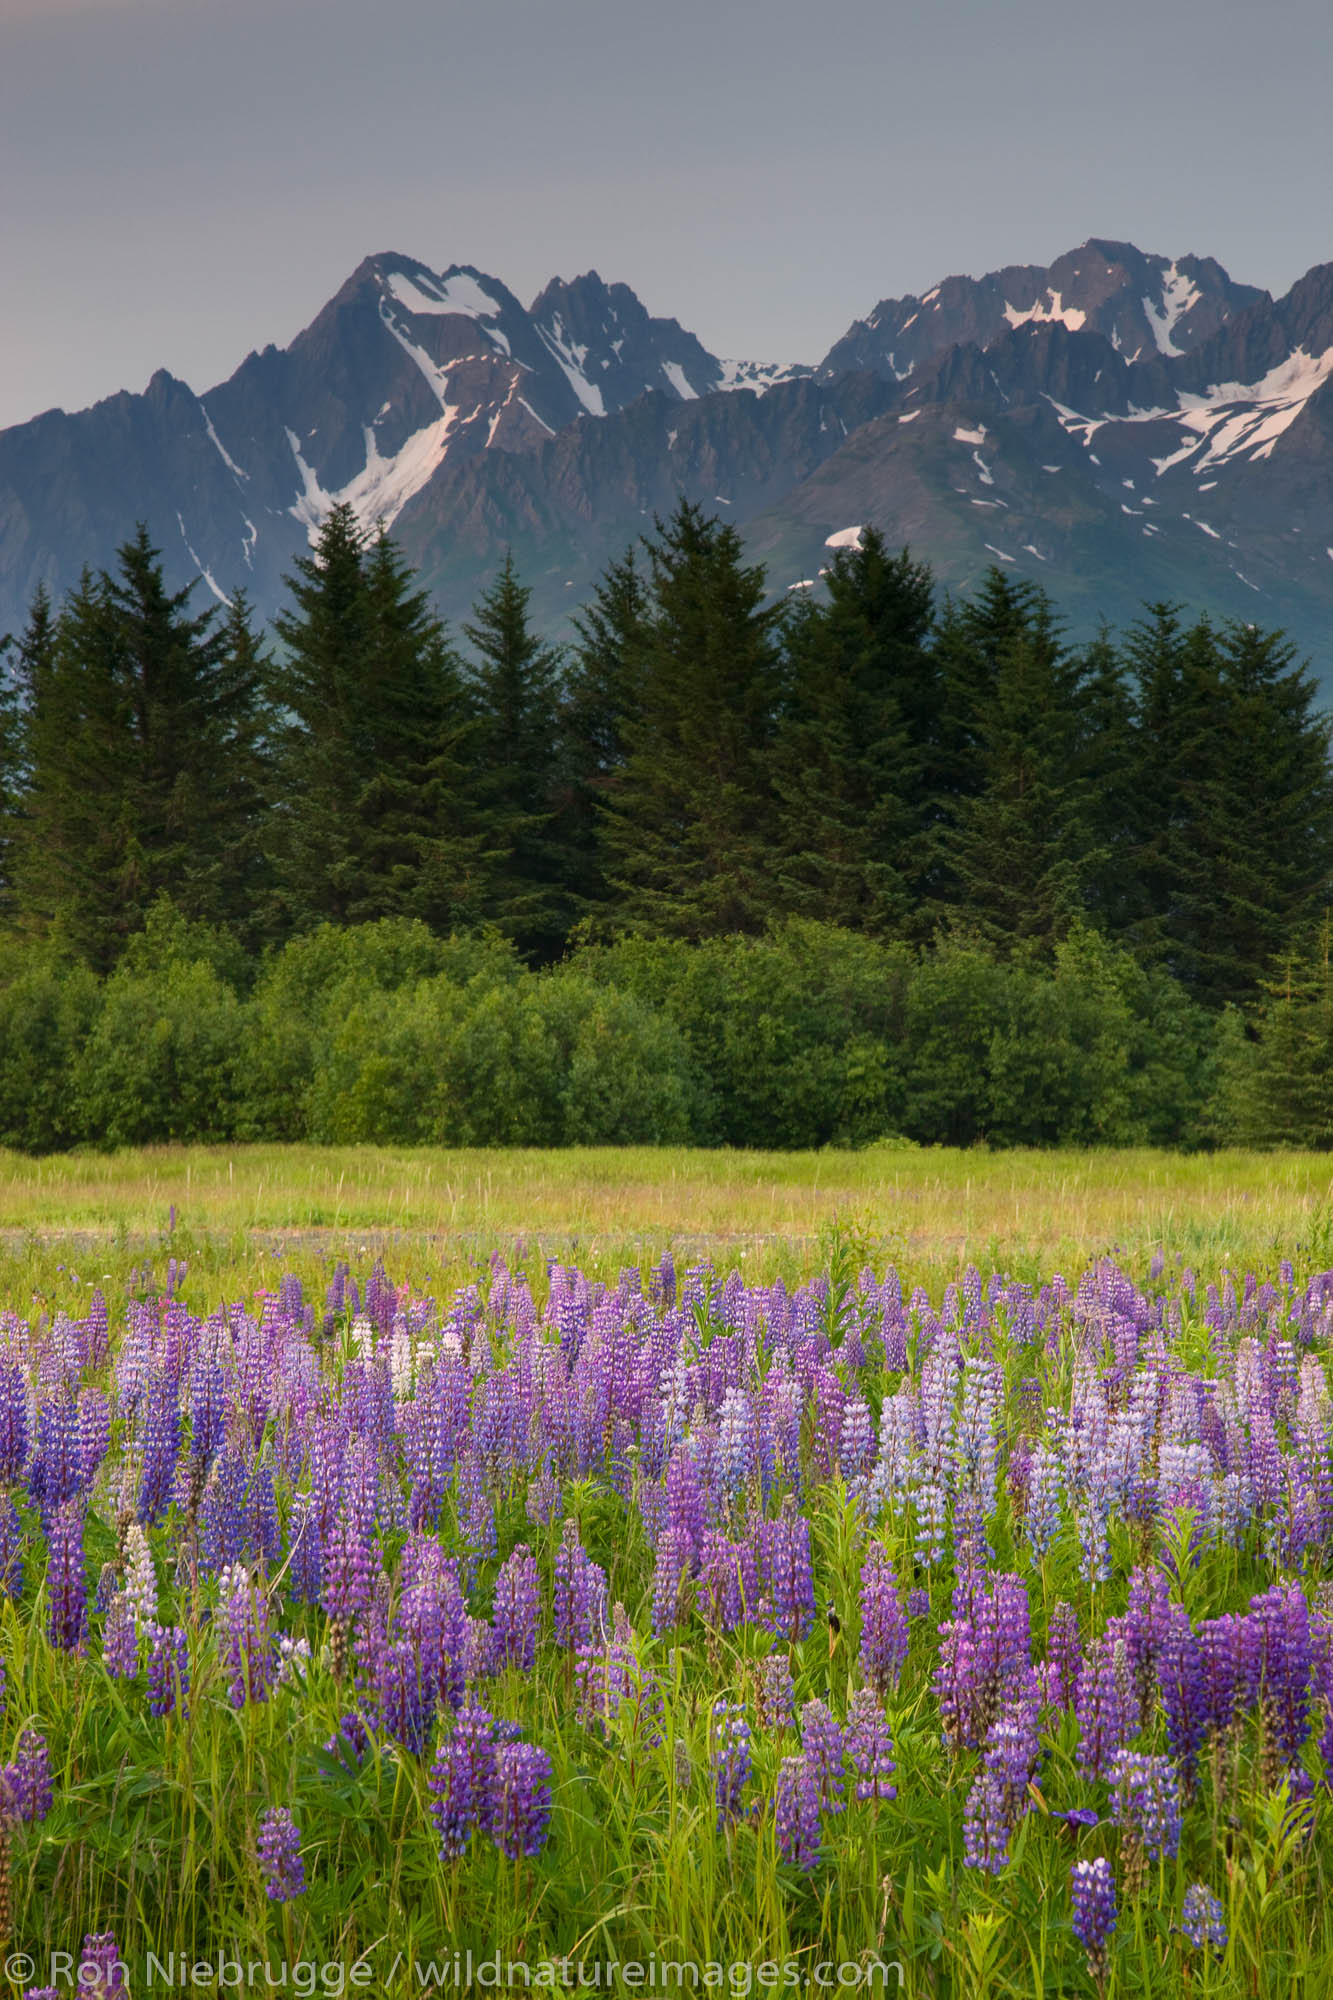 A field of lupine and Mt. Alice, part of the Chugach National Forest, from Seward, Alaska.